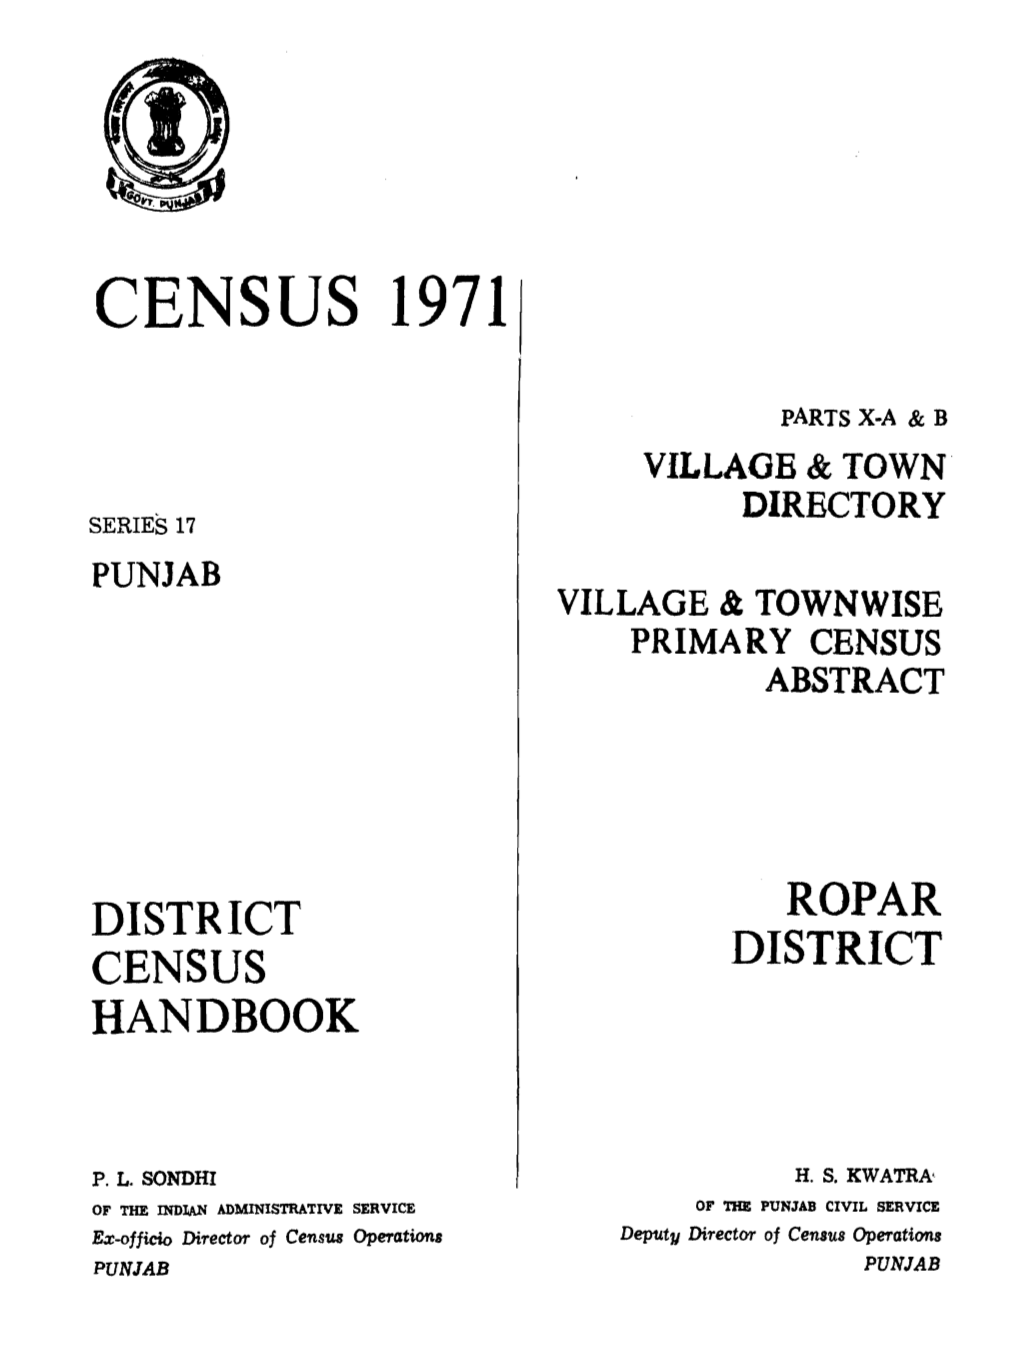 Village & Townwise Primary Census Abstract, Ropar , Part X-A & B